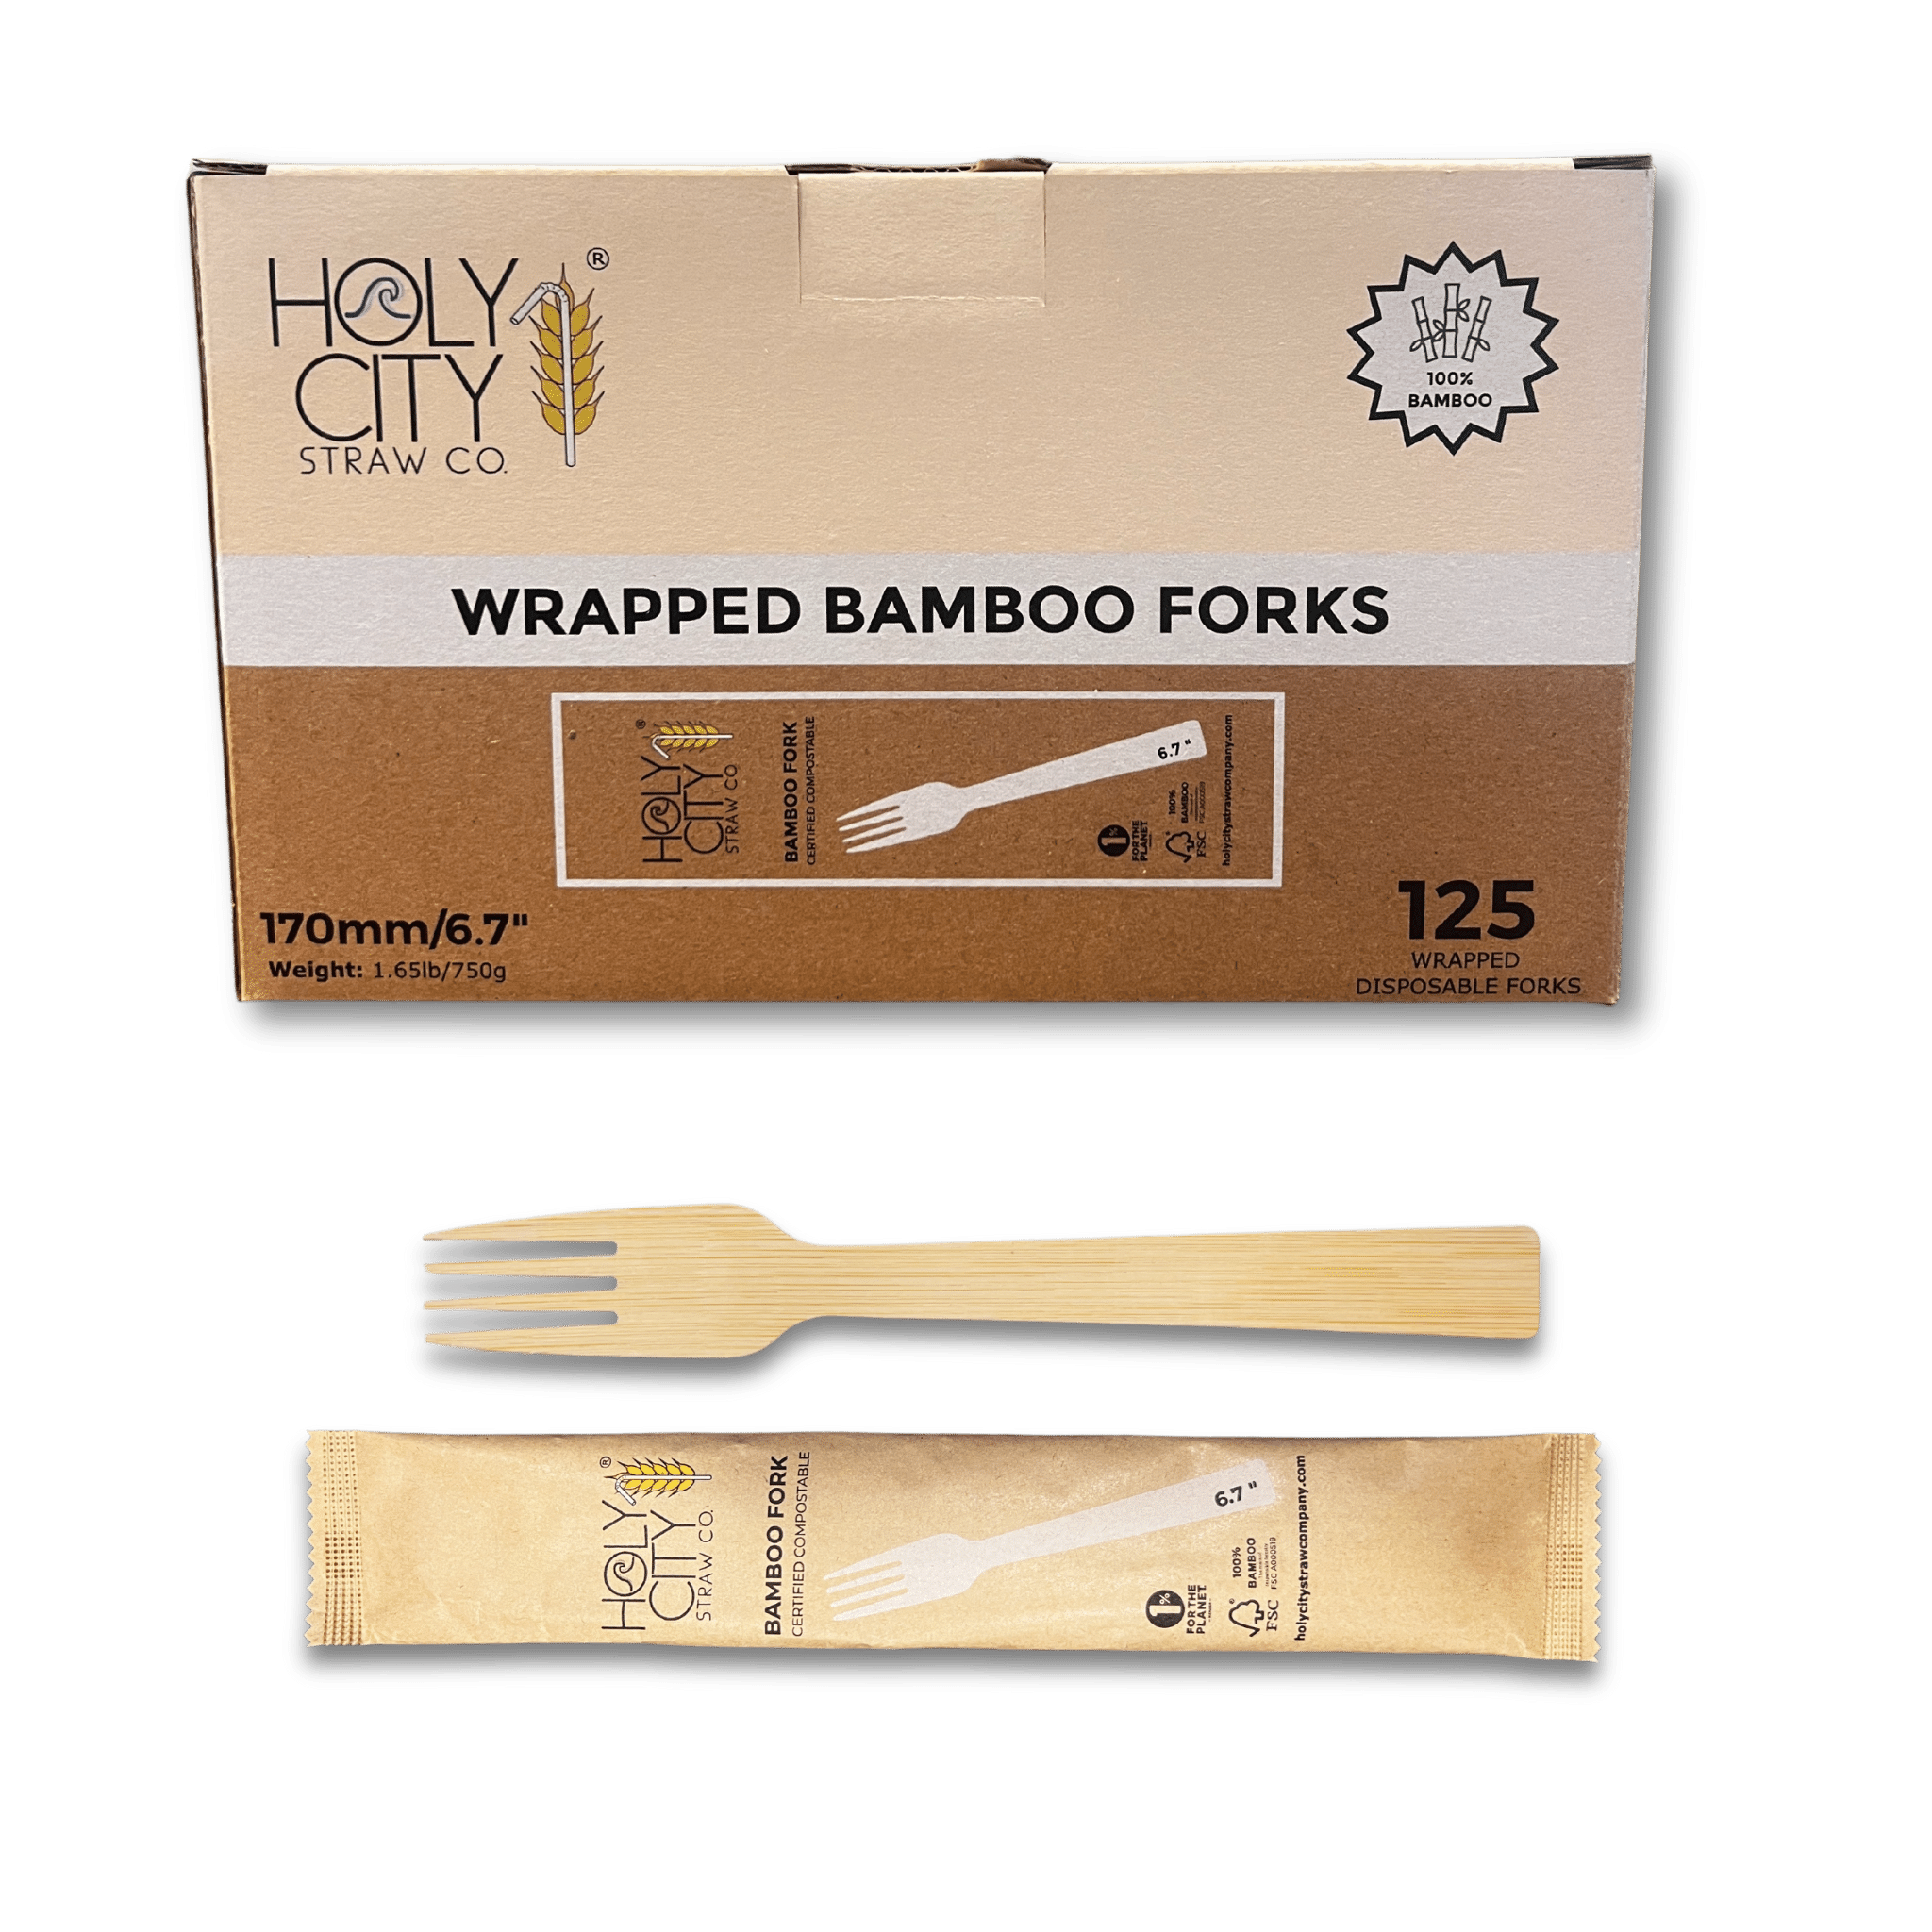 Holy City Straw Co Bamboo Cutlery 170mm Fork Wrapped 125ct front